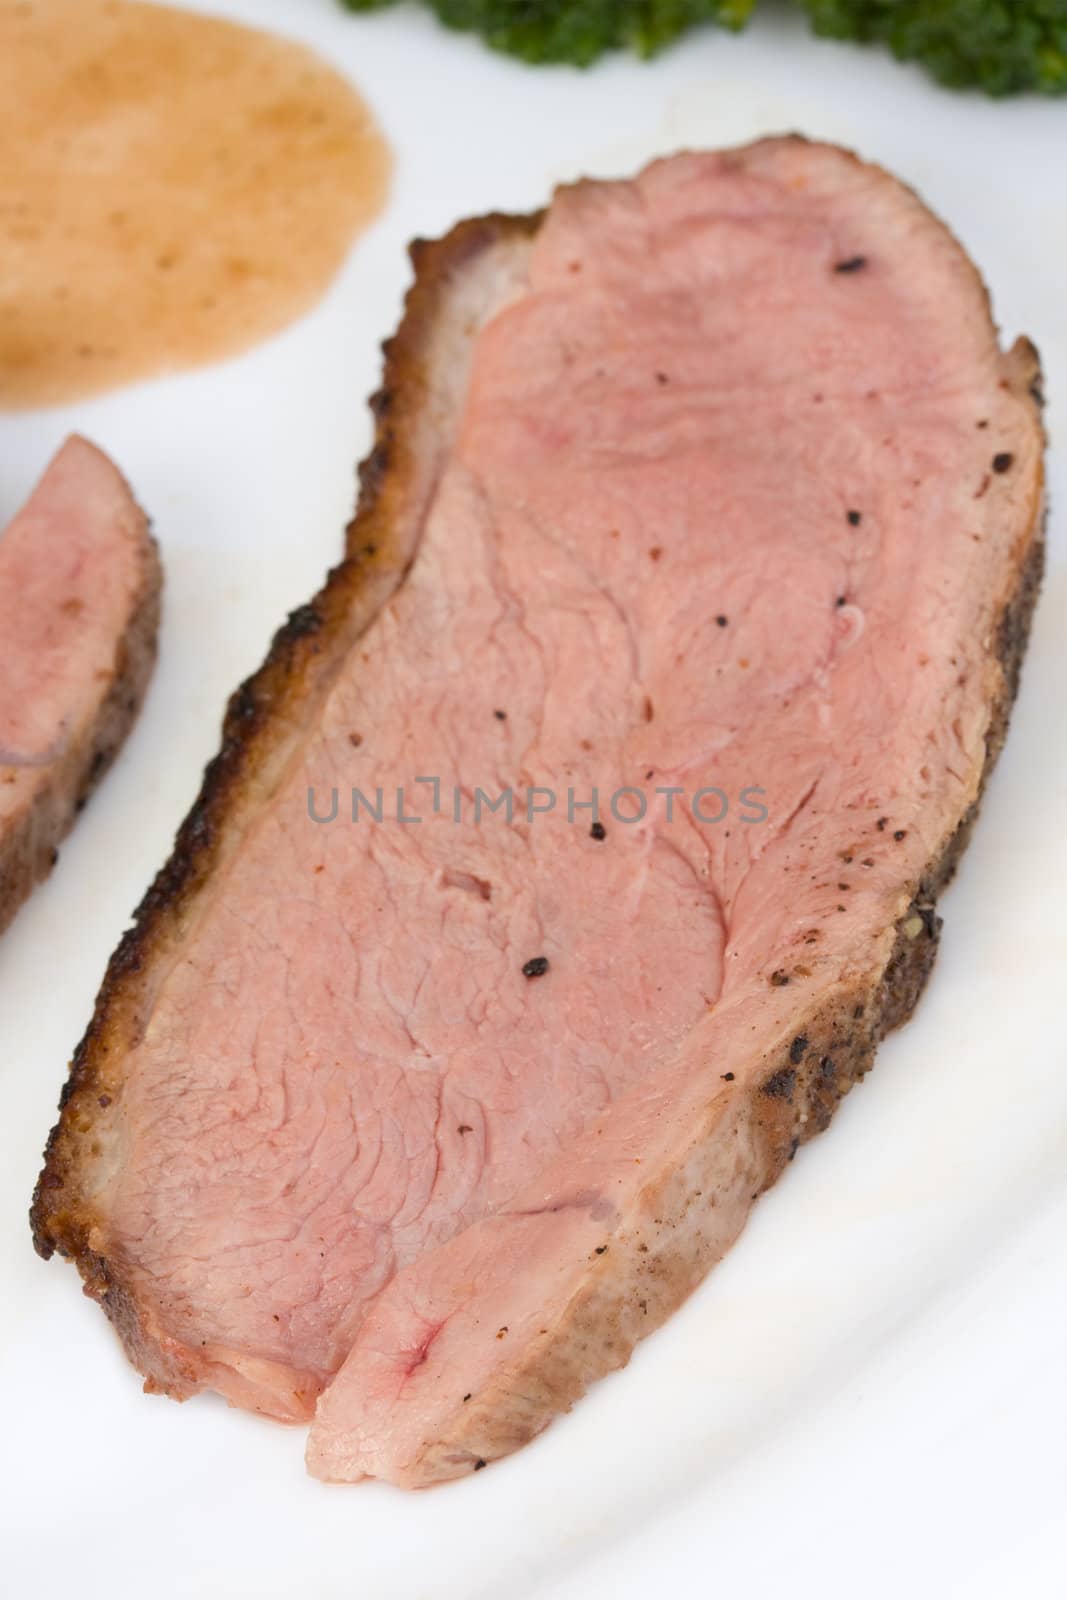 slices of a roasted duck fillet on a white plate by bernjuer